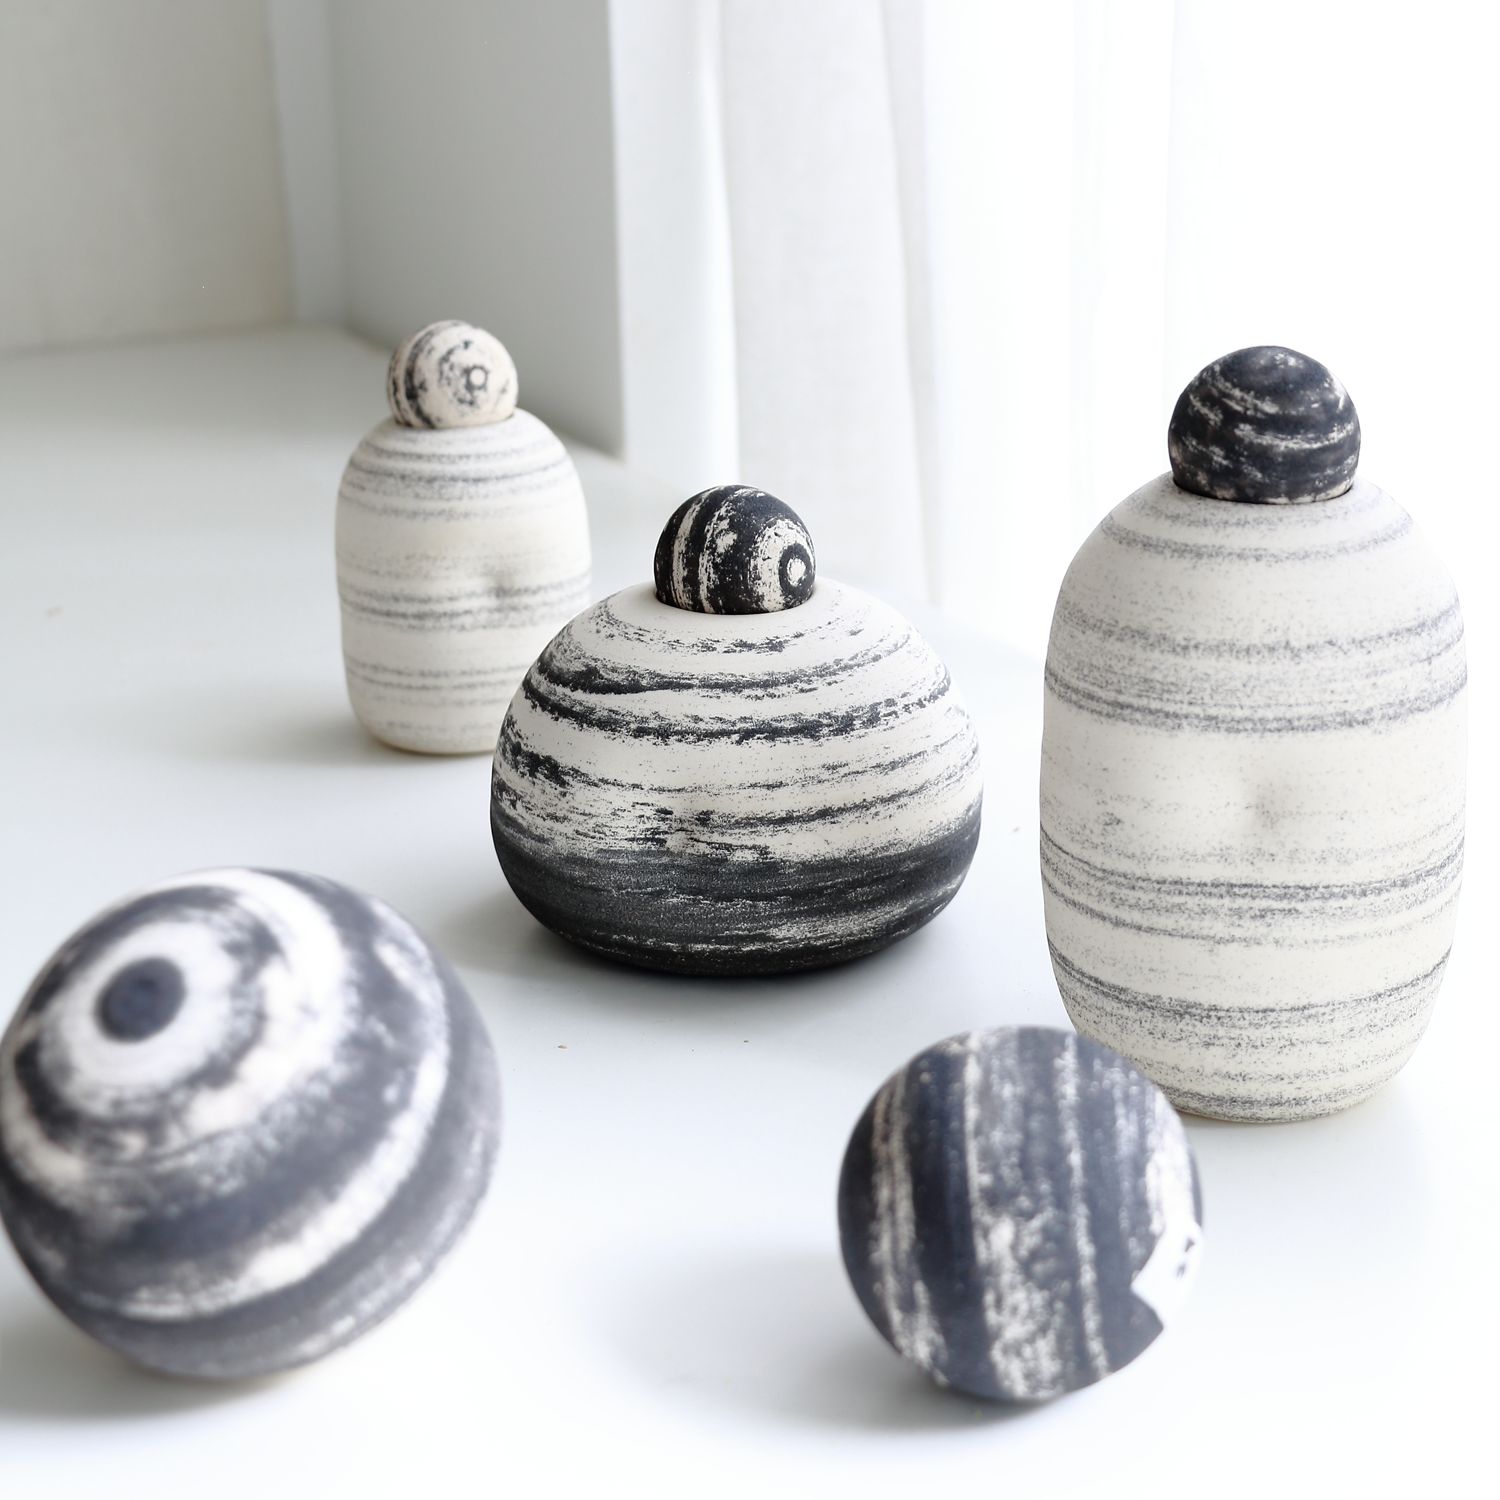 Celina Kang: Round Vase with Pebble Ball Stopper Product Image 2 of 2